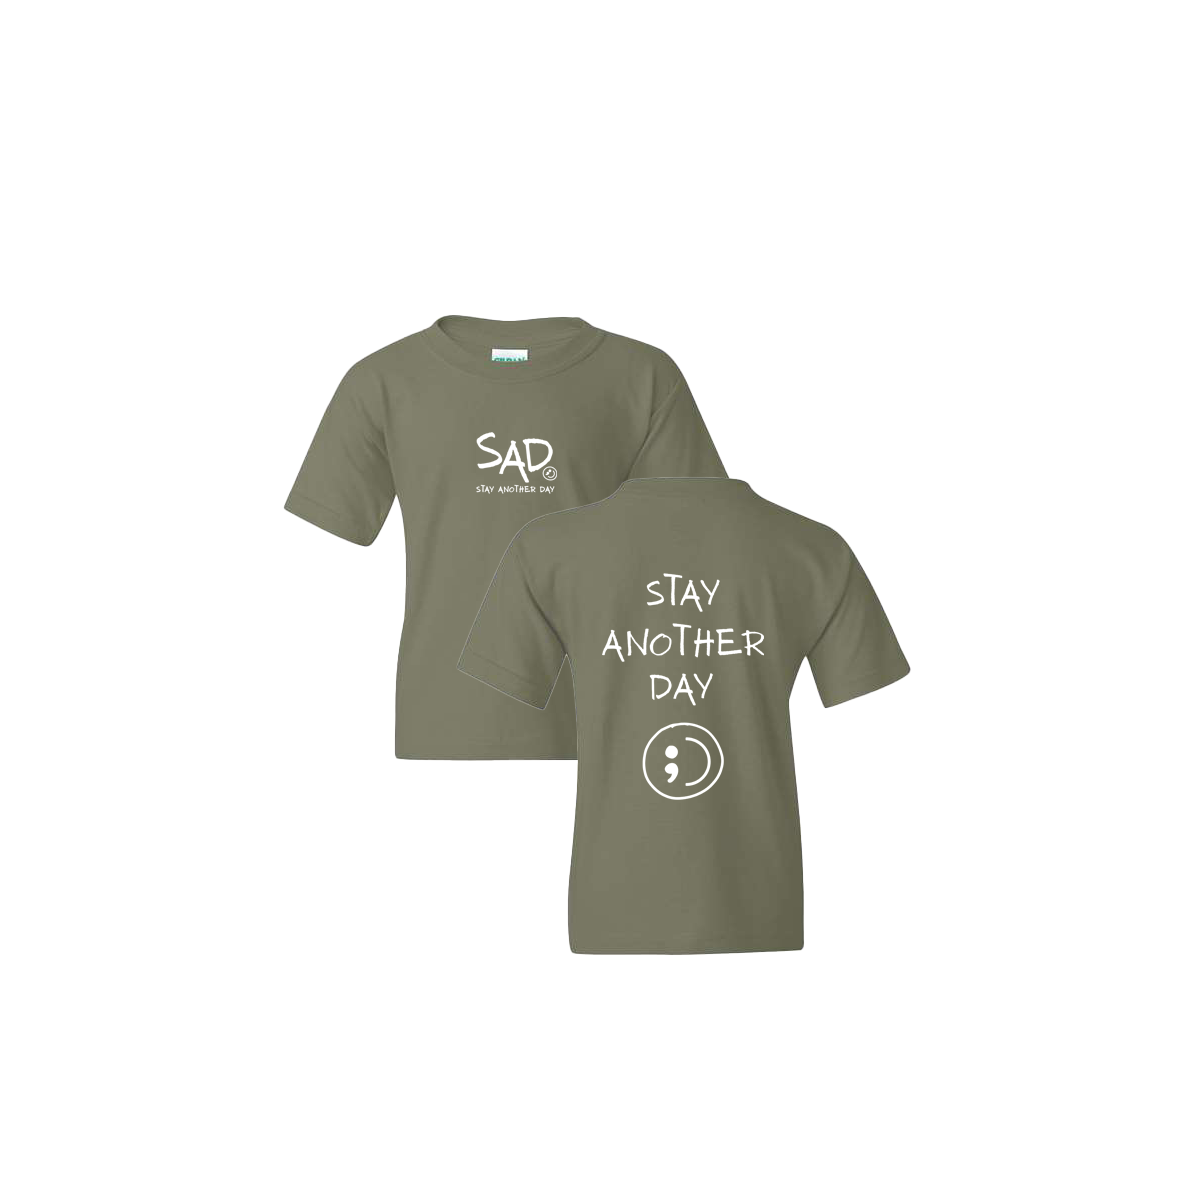 Stay Another Day Screen Printed Military Green Youth Tshirt